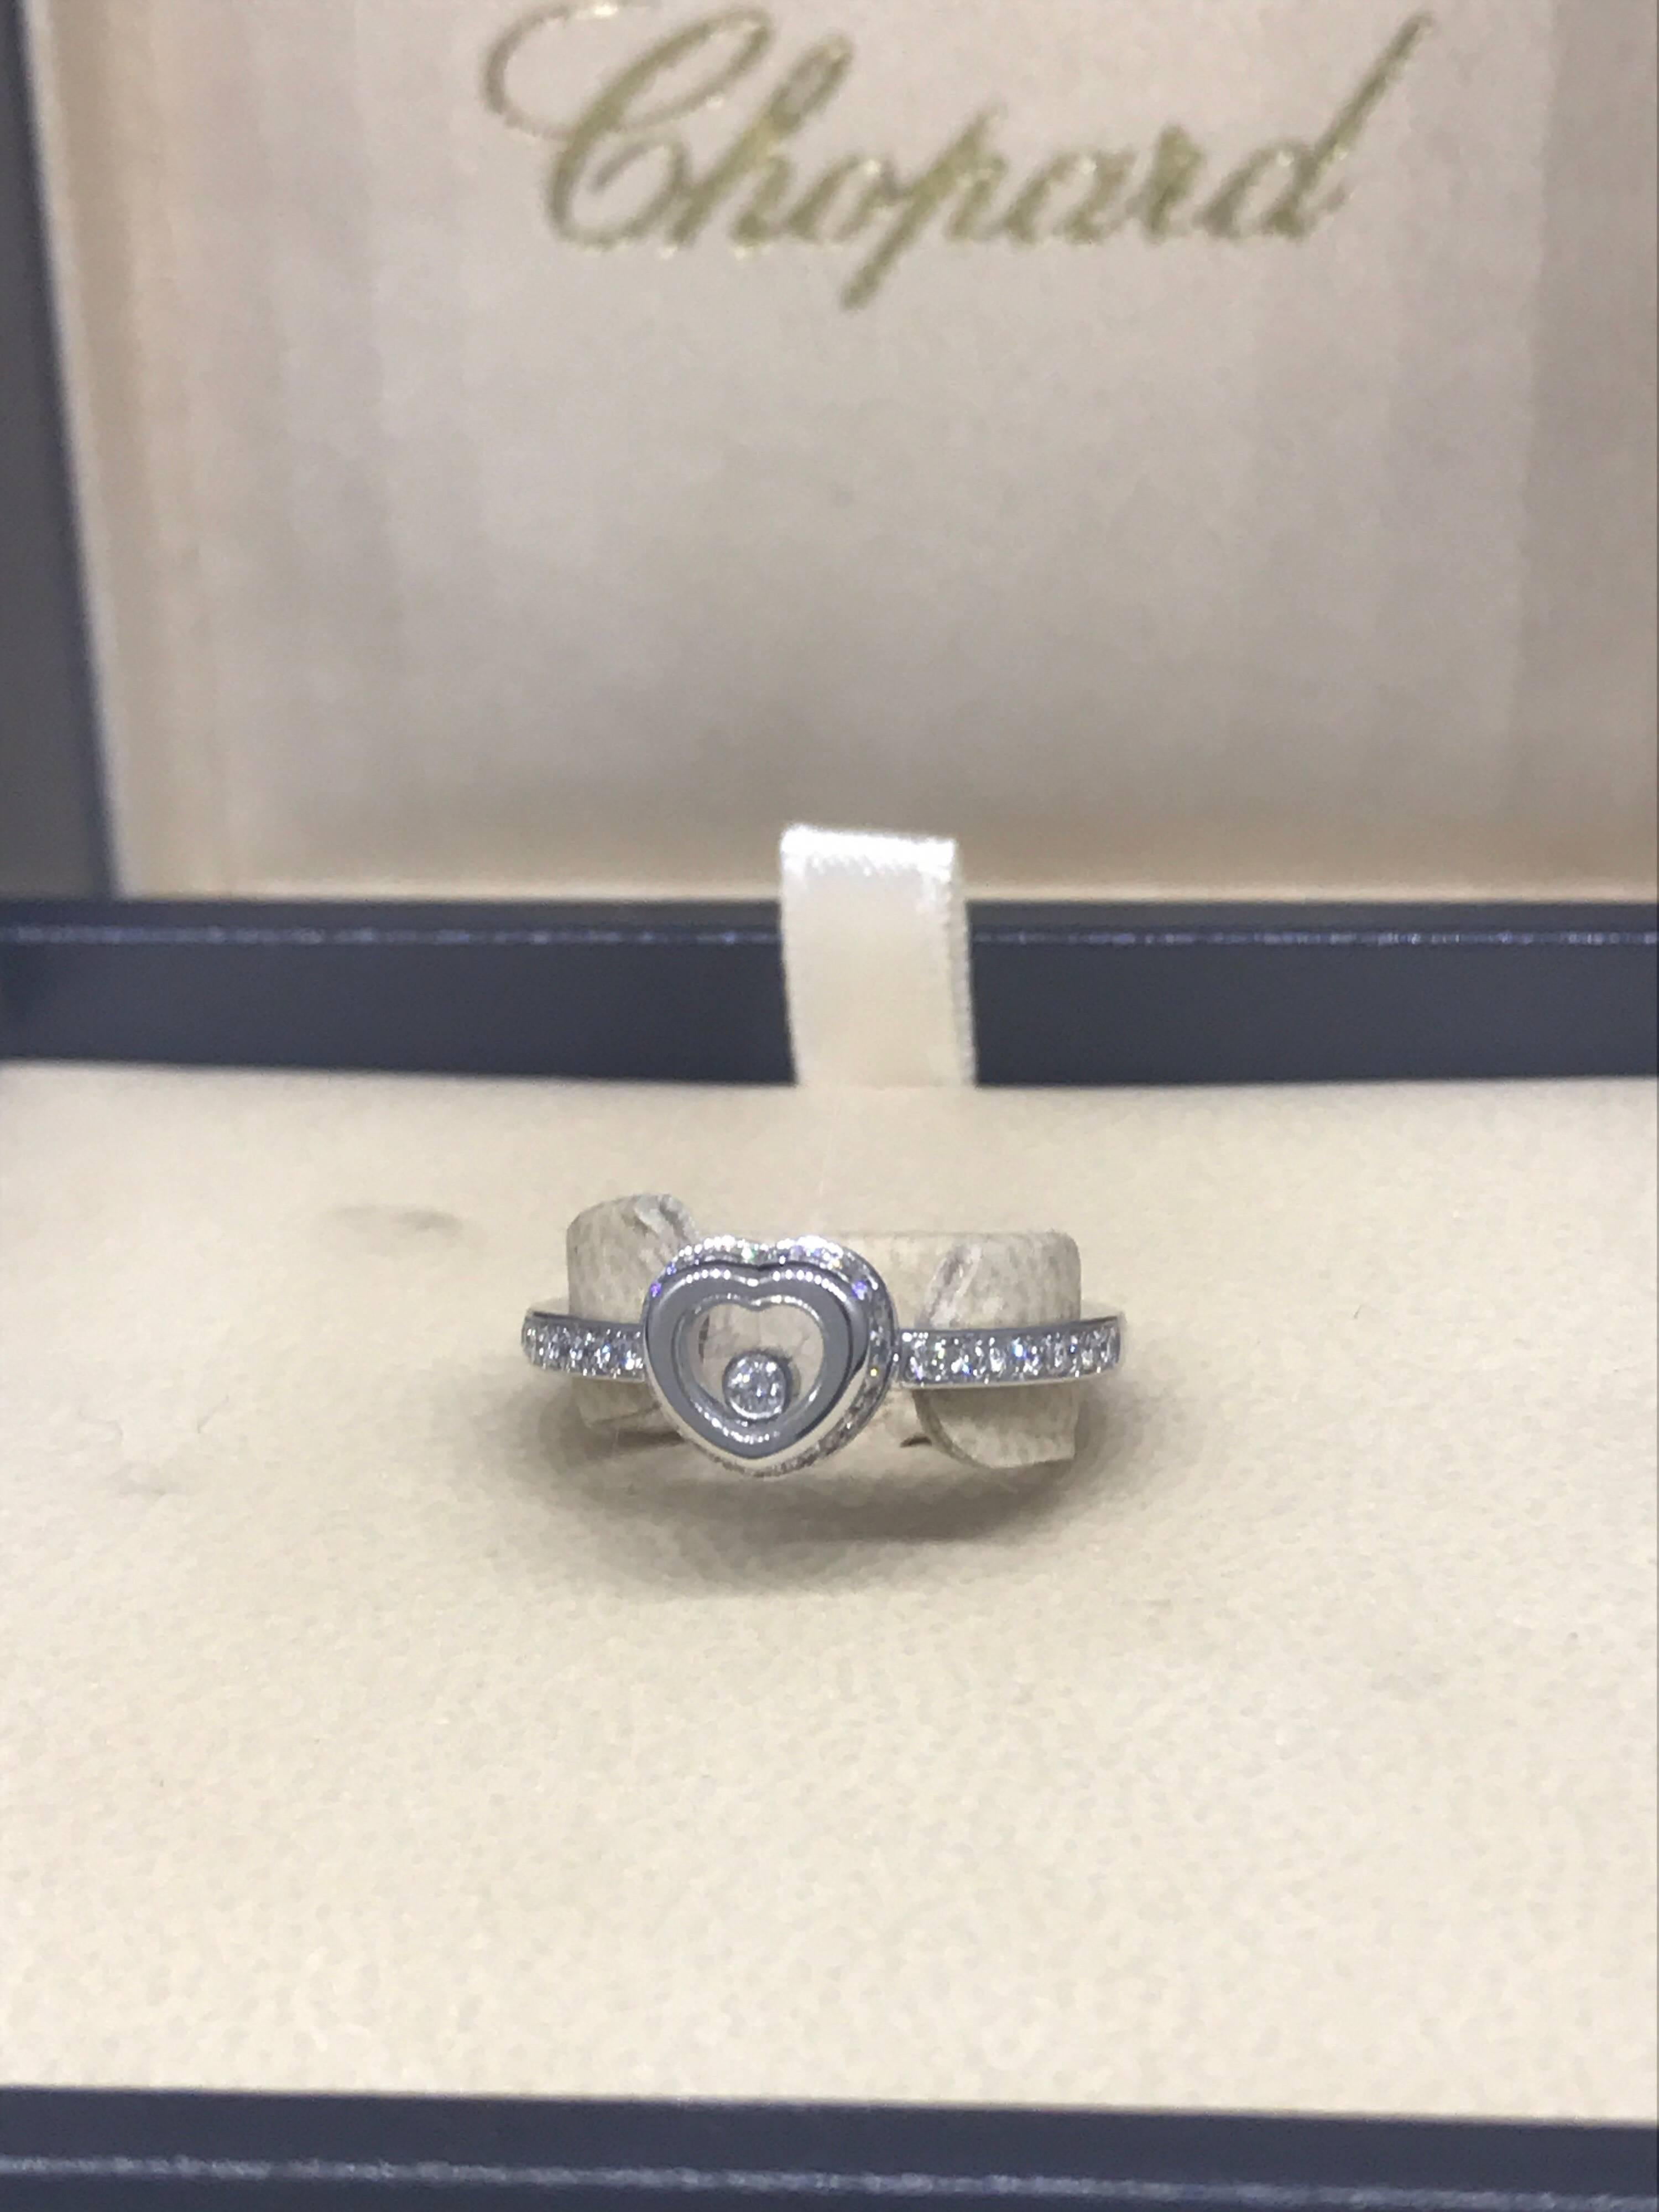 Chopard Happy Diamonds Heart Ring

Model Number: 82/9009-1110

100% Authentic

Brand New

Comes with original Chopard box, certificate of authenticity and warranty, and jewels manual

18 Karat White Gold (5.20gr)

30 Diamonds on the ring (.21